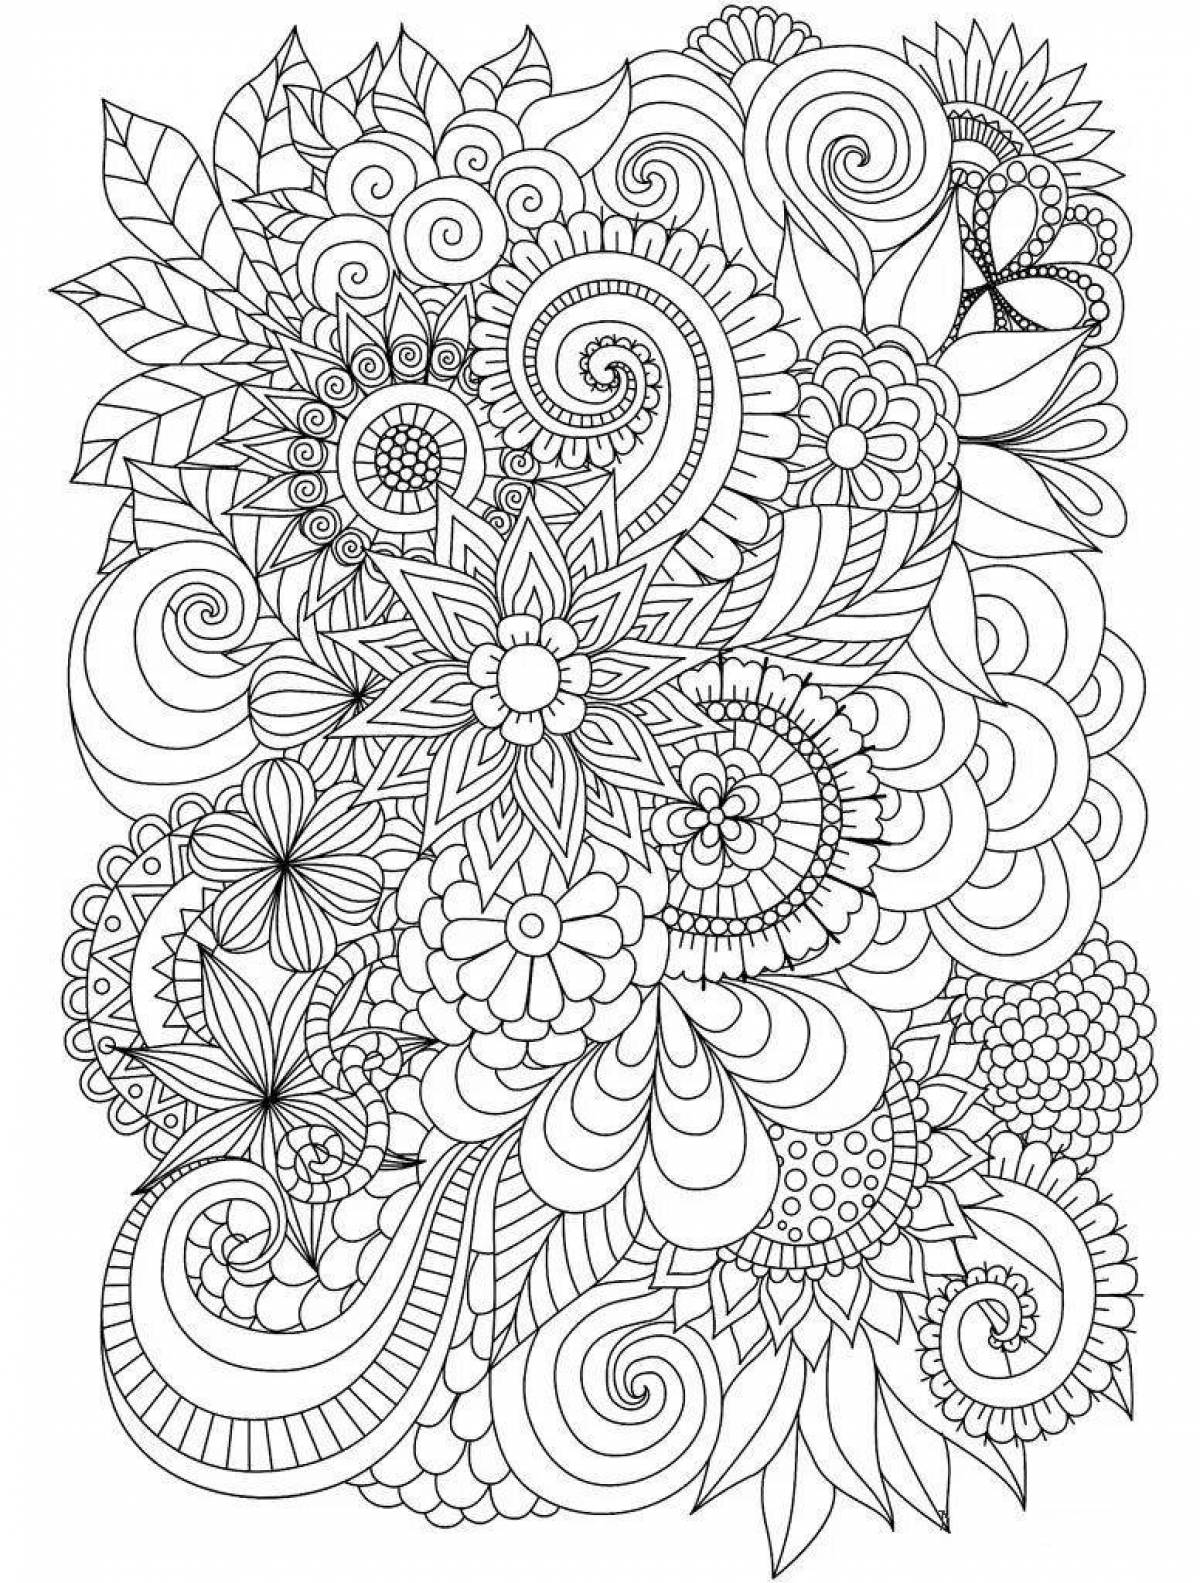 Artistic coloring for adults